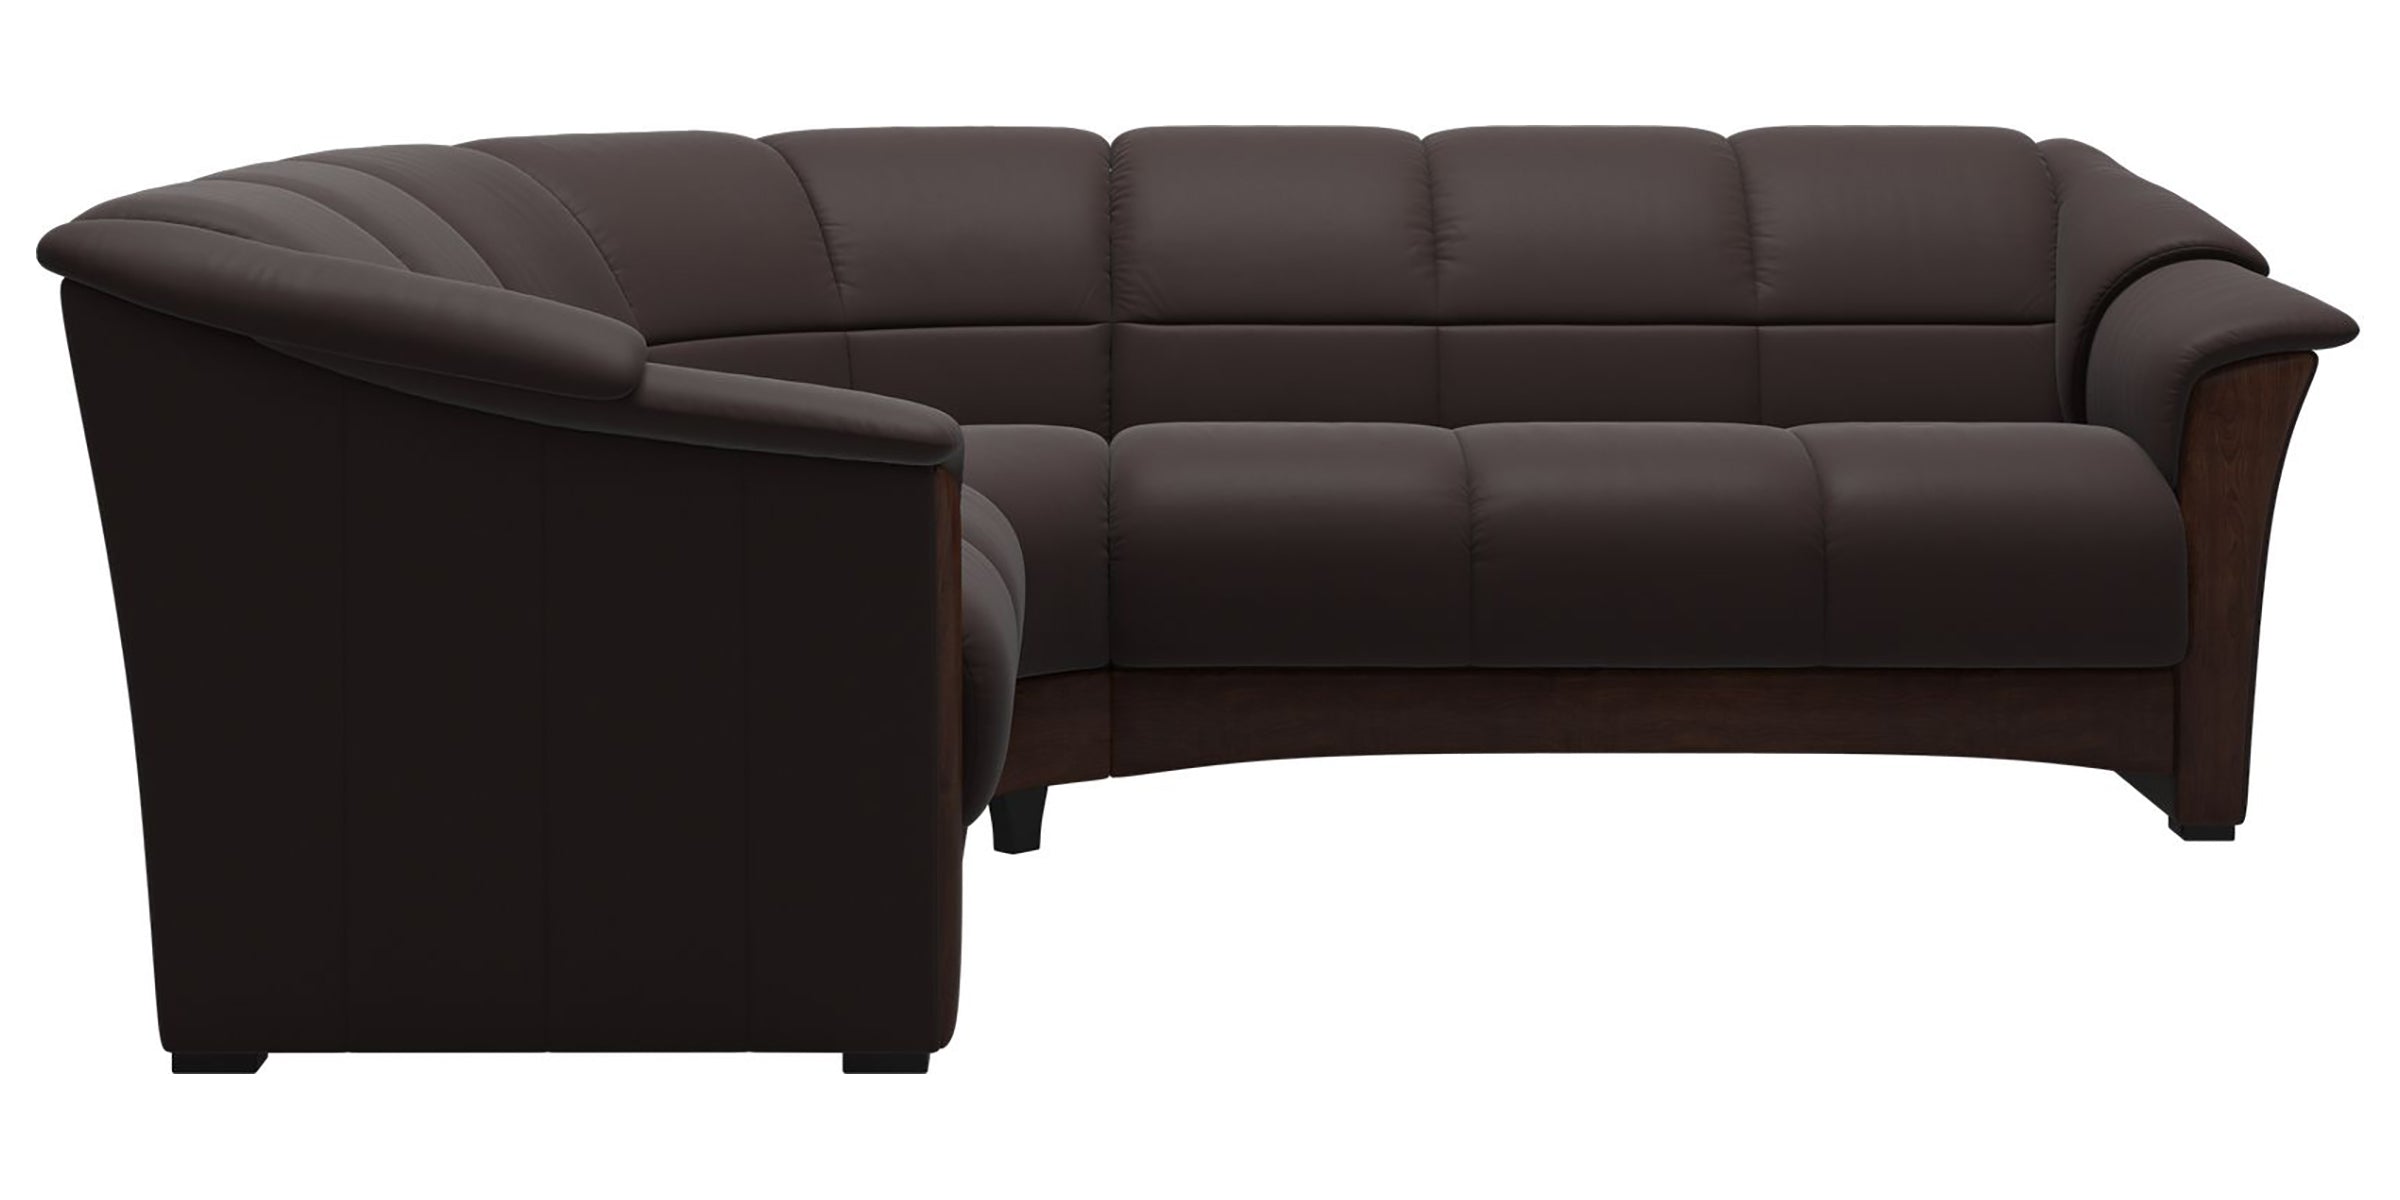 Paloma Leather Chocolate and Brown Base | Stressless Oslo Sectional | Valley Ridge Furniture